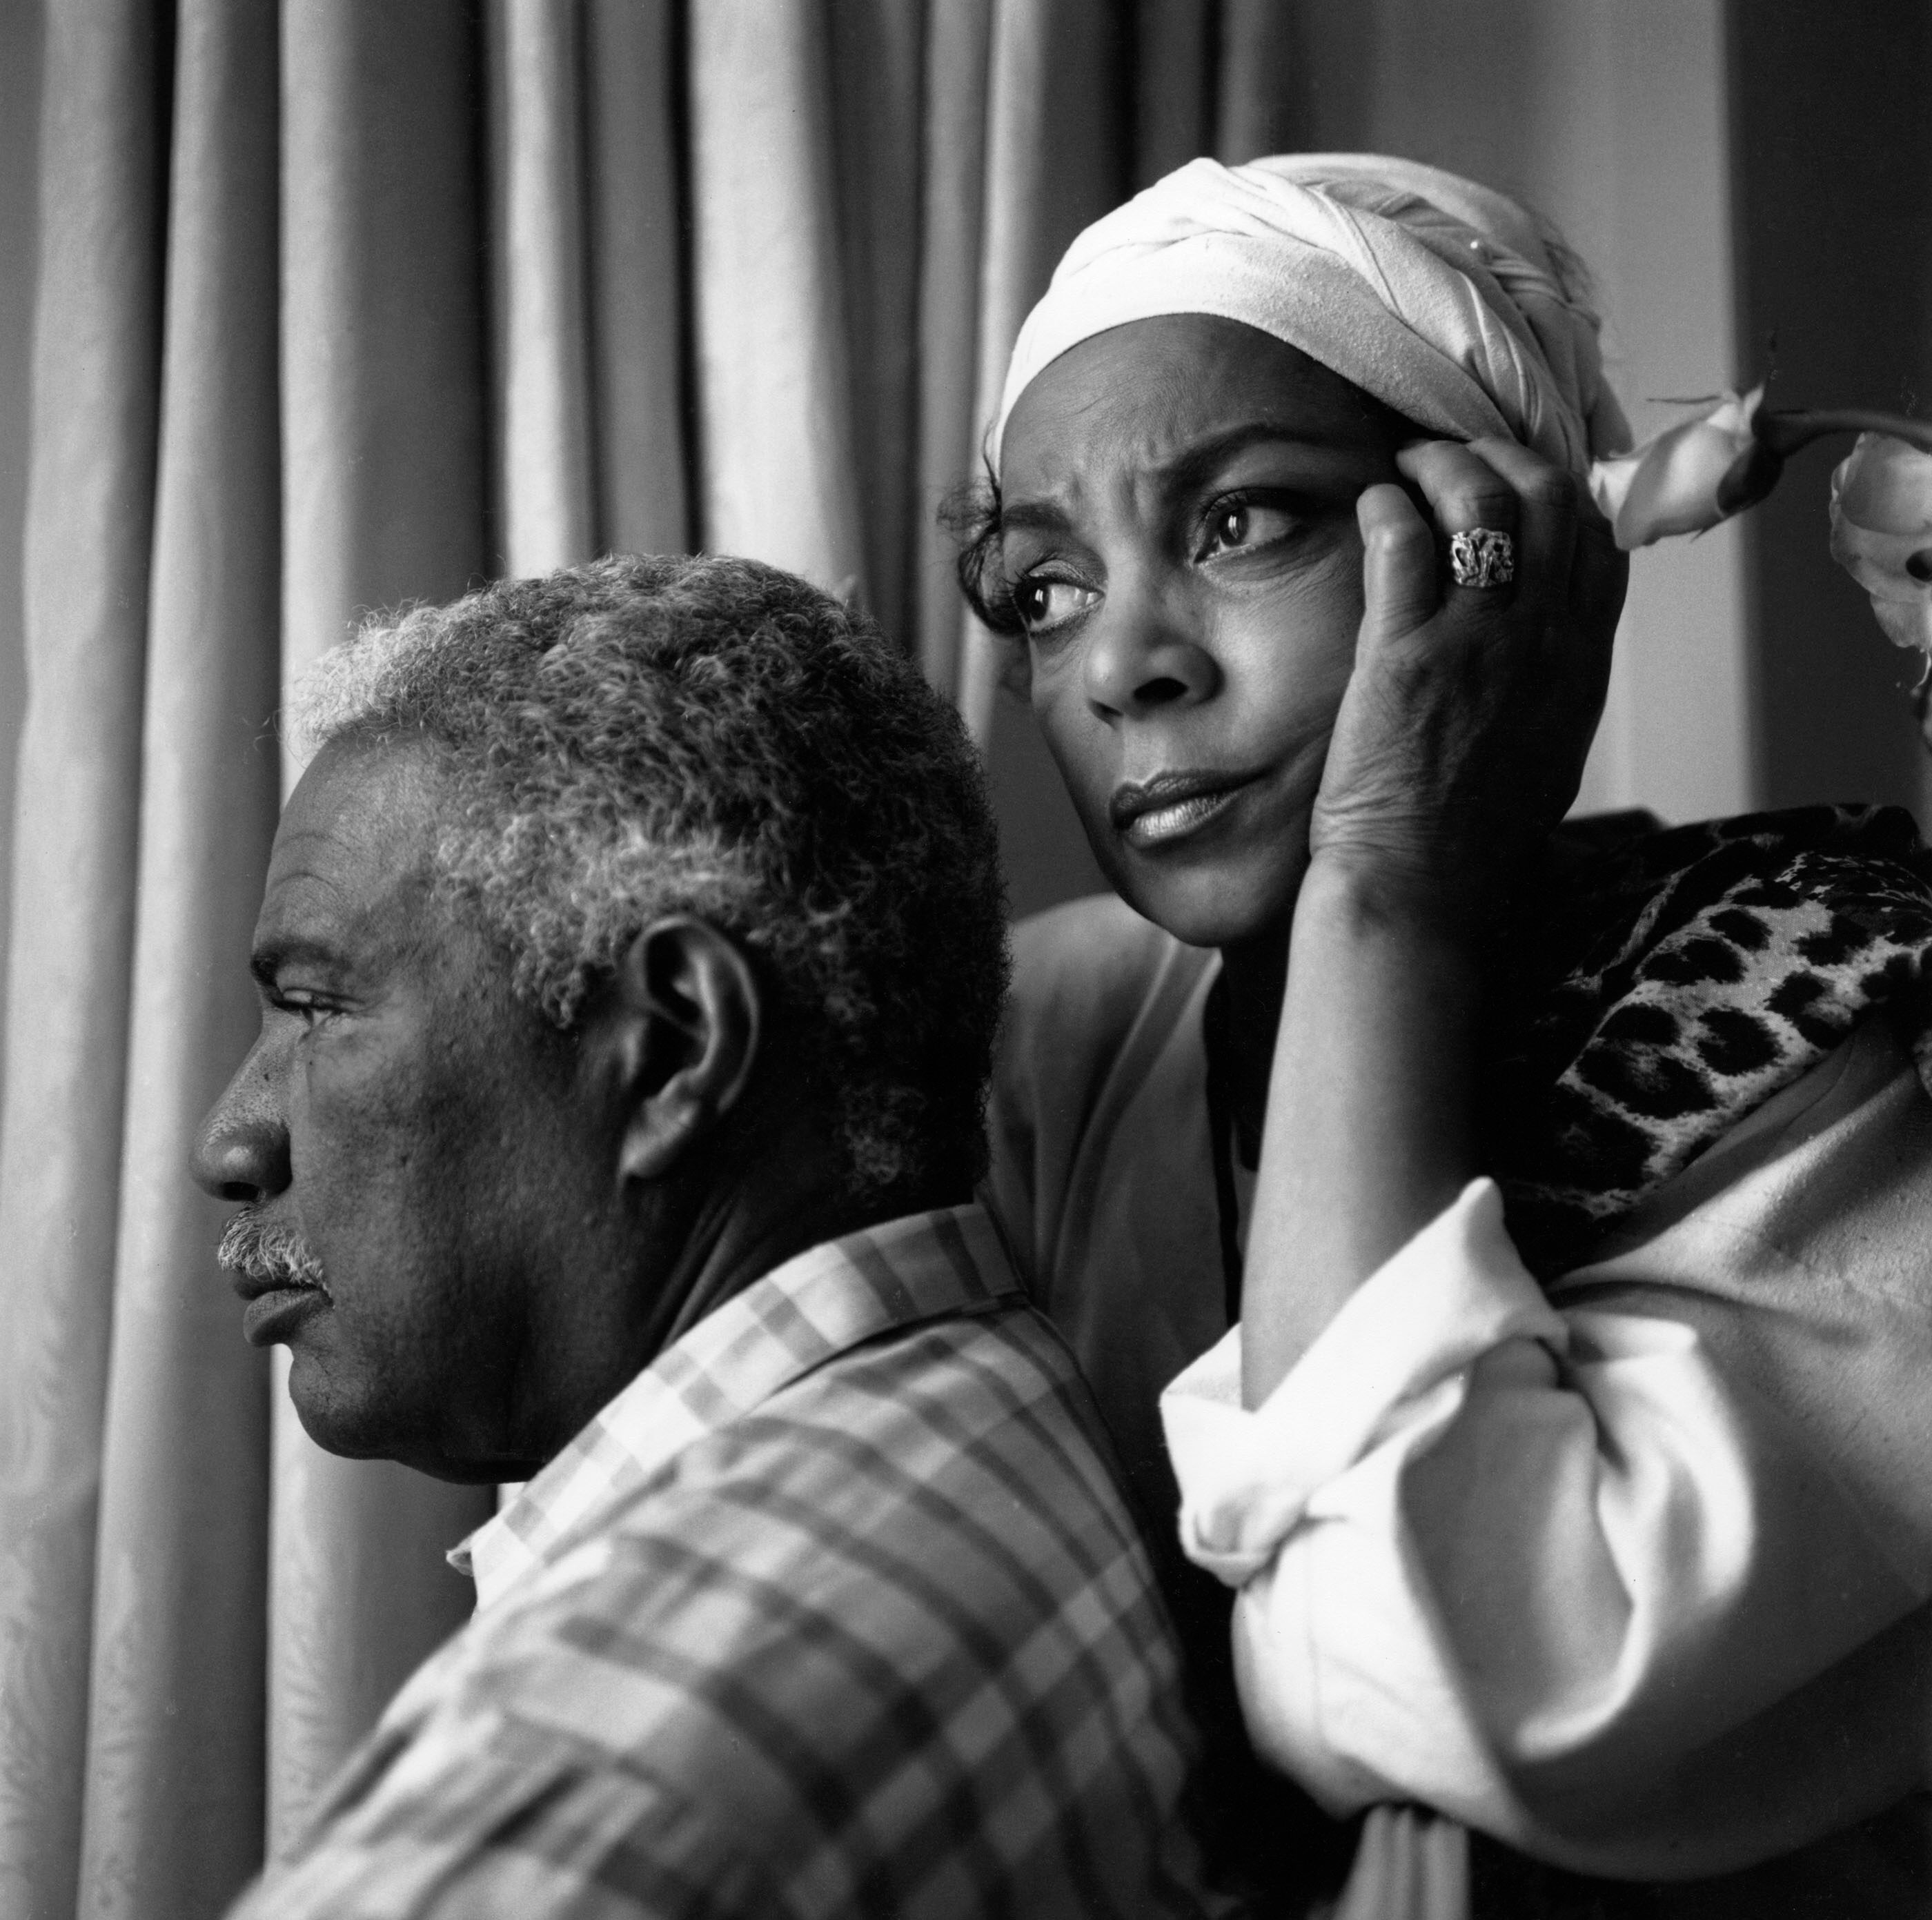 Ossie Davis and Ruby Dee at the Cannes Film Festival